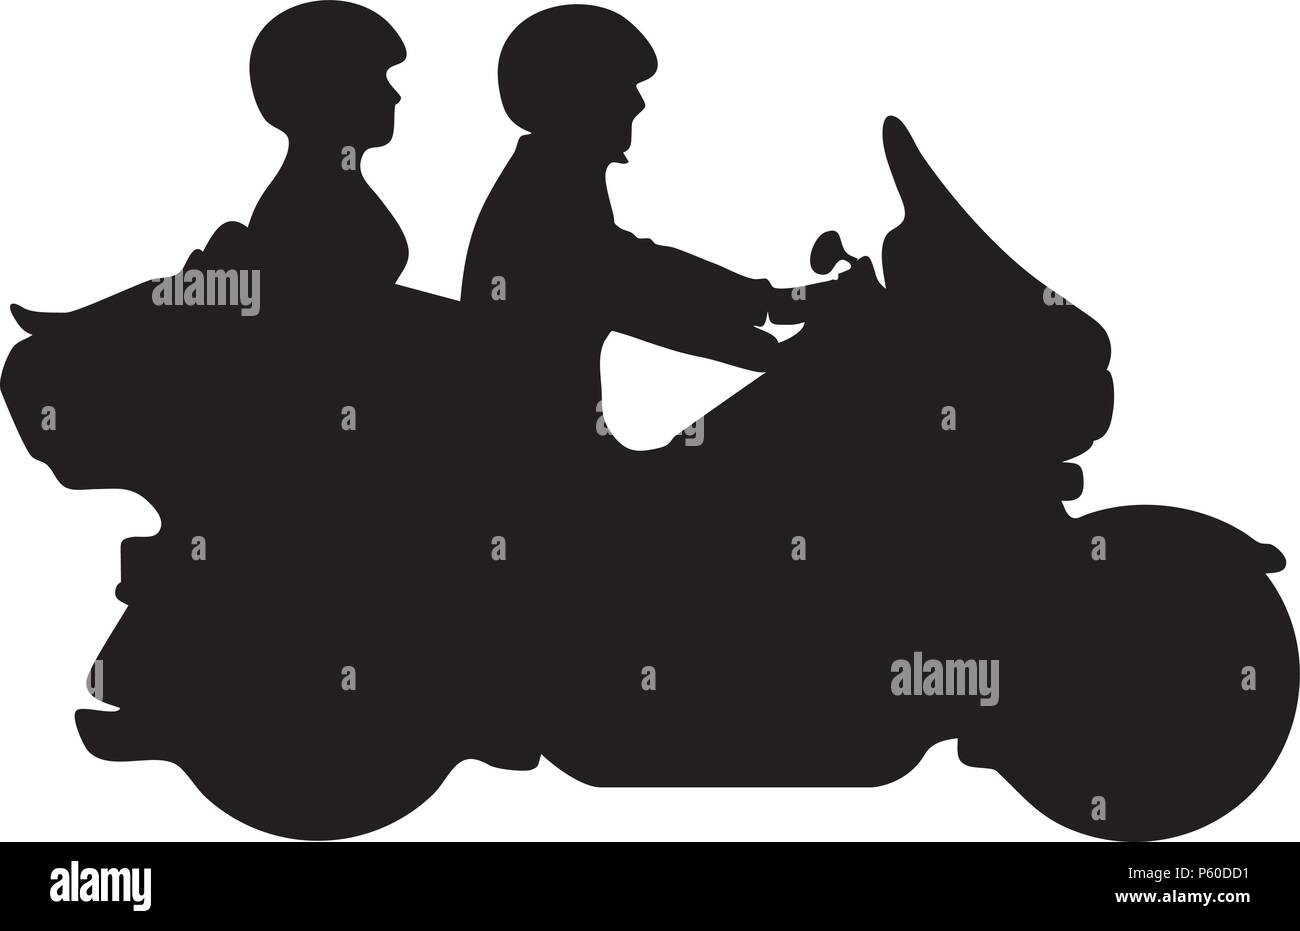 Couple Riding Motorcycle Silhouette Vector Illustration Stock Vector